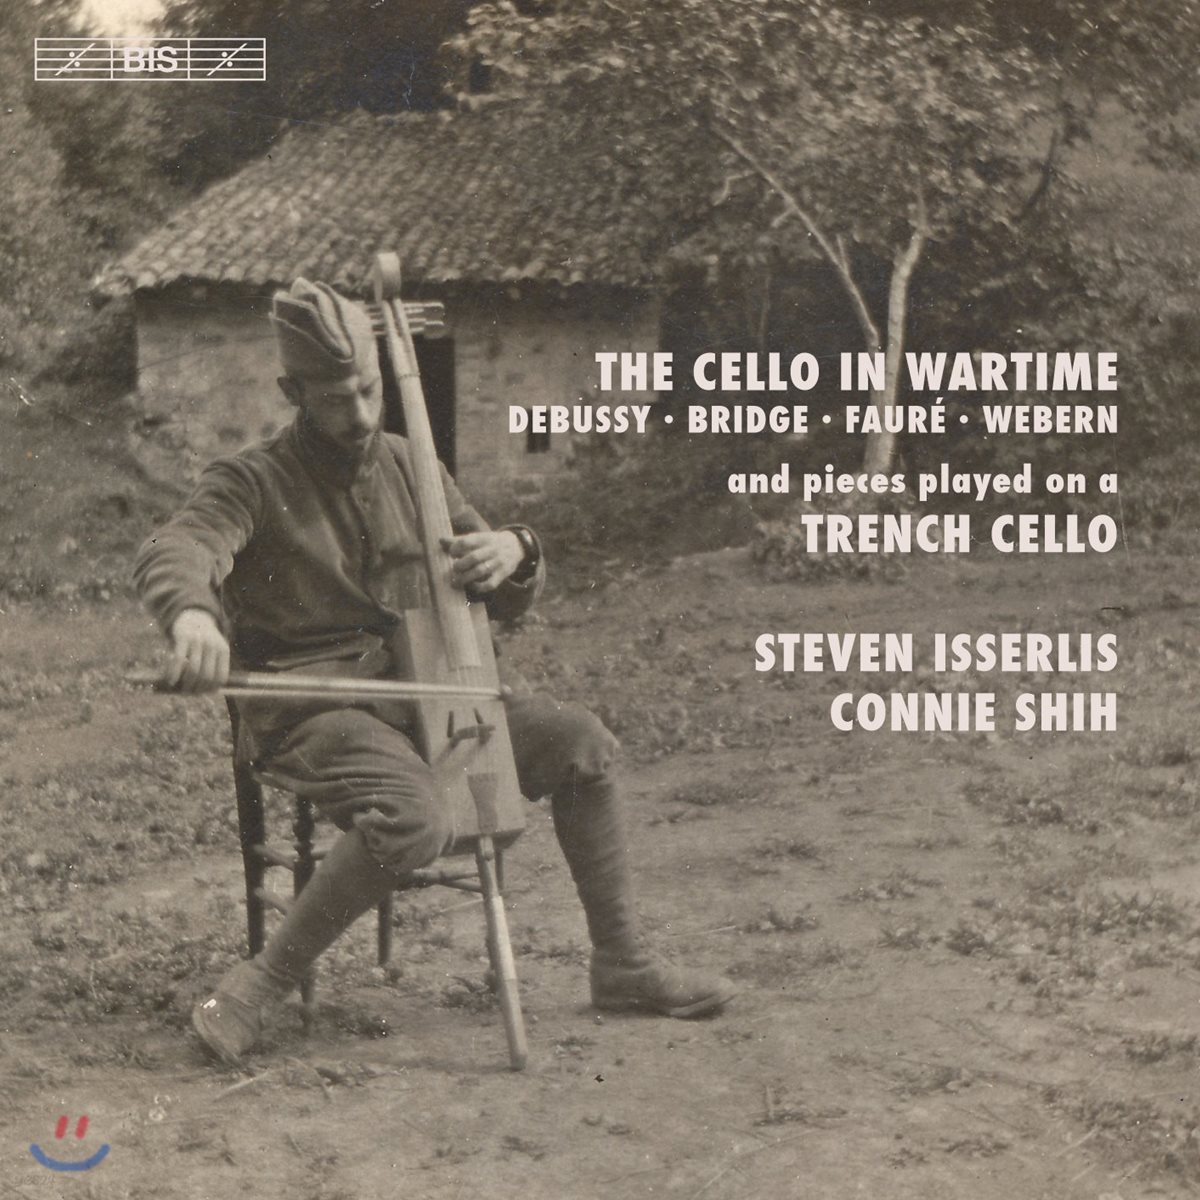 Steven Isserlis 전시의 첼로 - 드뷔시 / 브릿지 / 포레 / 베베른 (The Cello in Wartime)